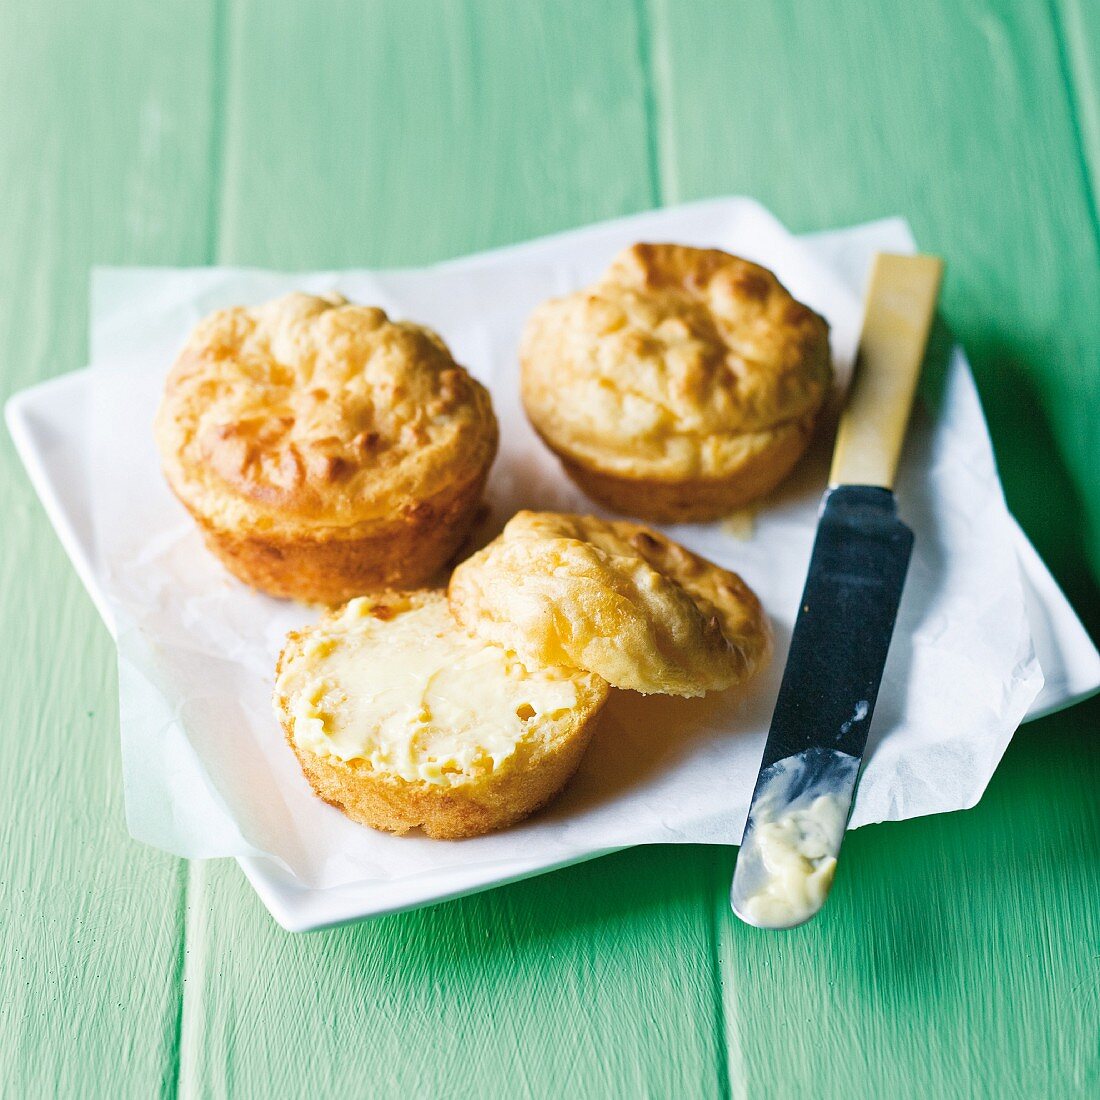 Cheddar cheese muffins